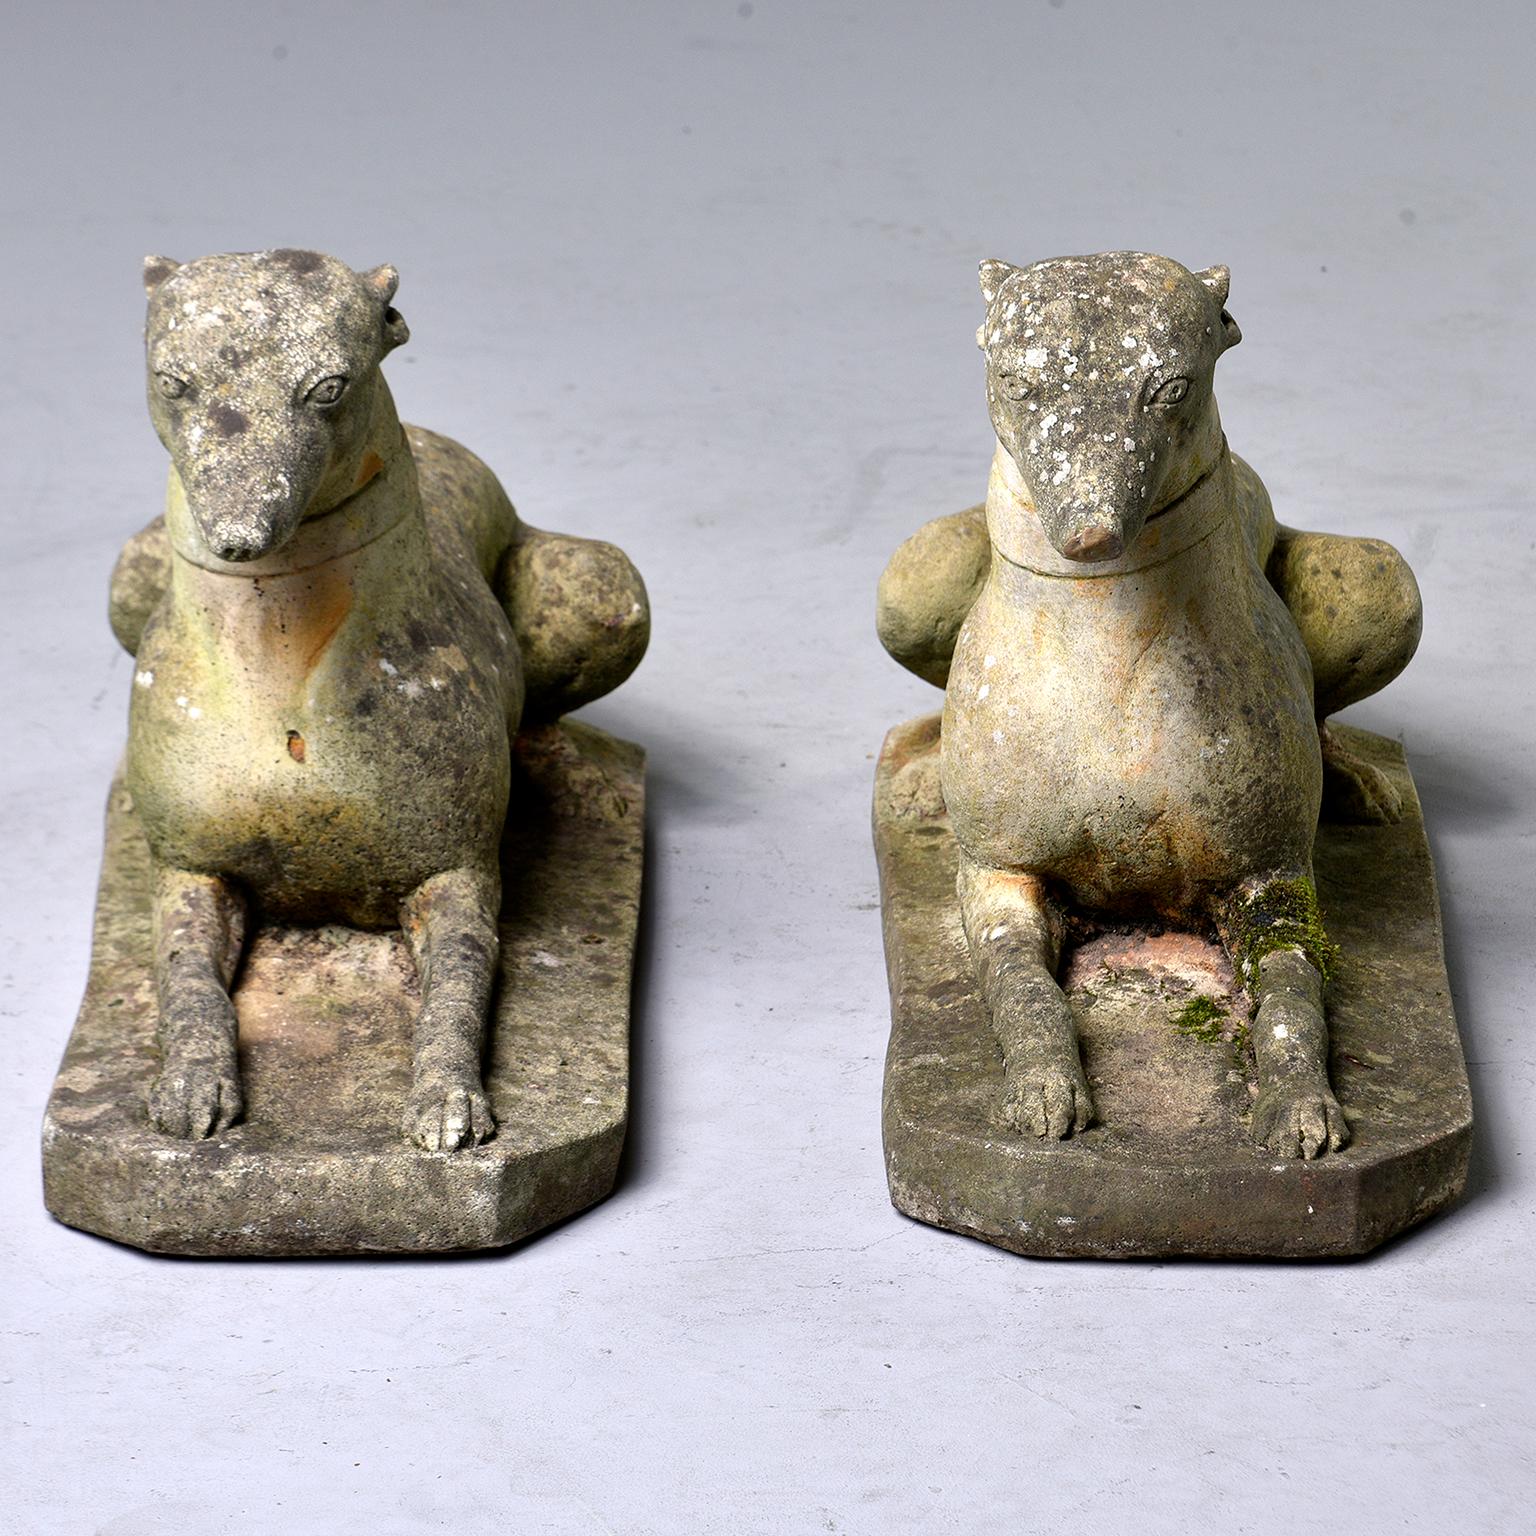 Pair of English stone garden statues in the form of whippet dogs. Sleek and classically rendered, each statue shows significant outdoor wear and patina including moss. Unknown maker. Sold and priced as a pair.